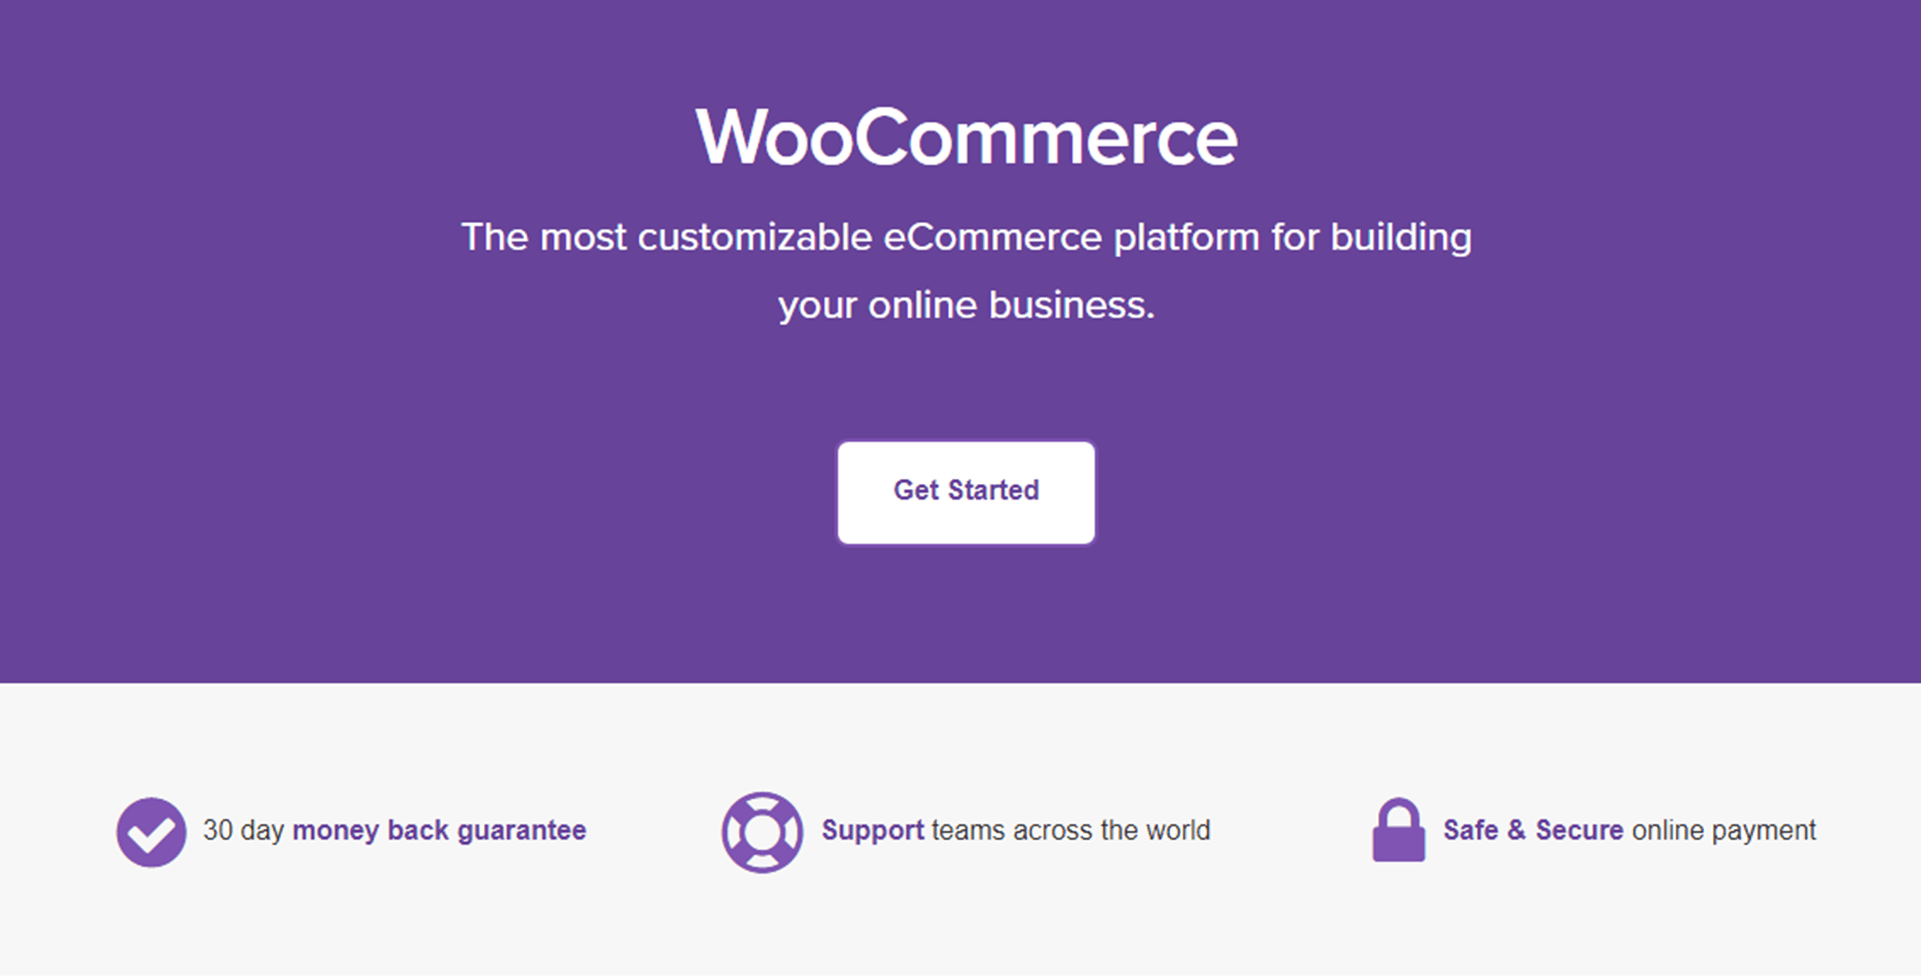 Getting Started With WooCommerce